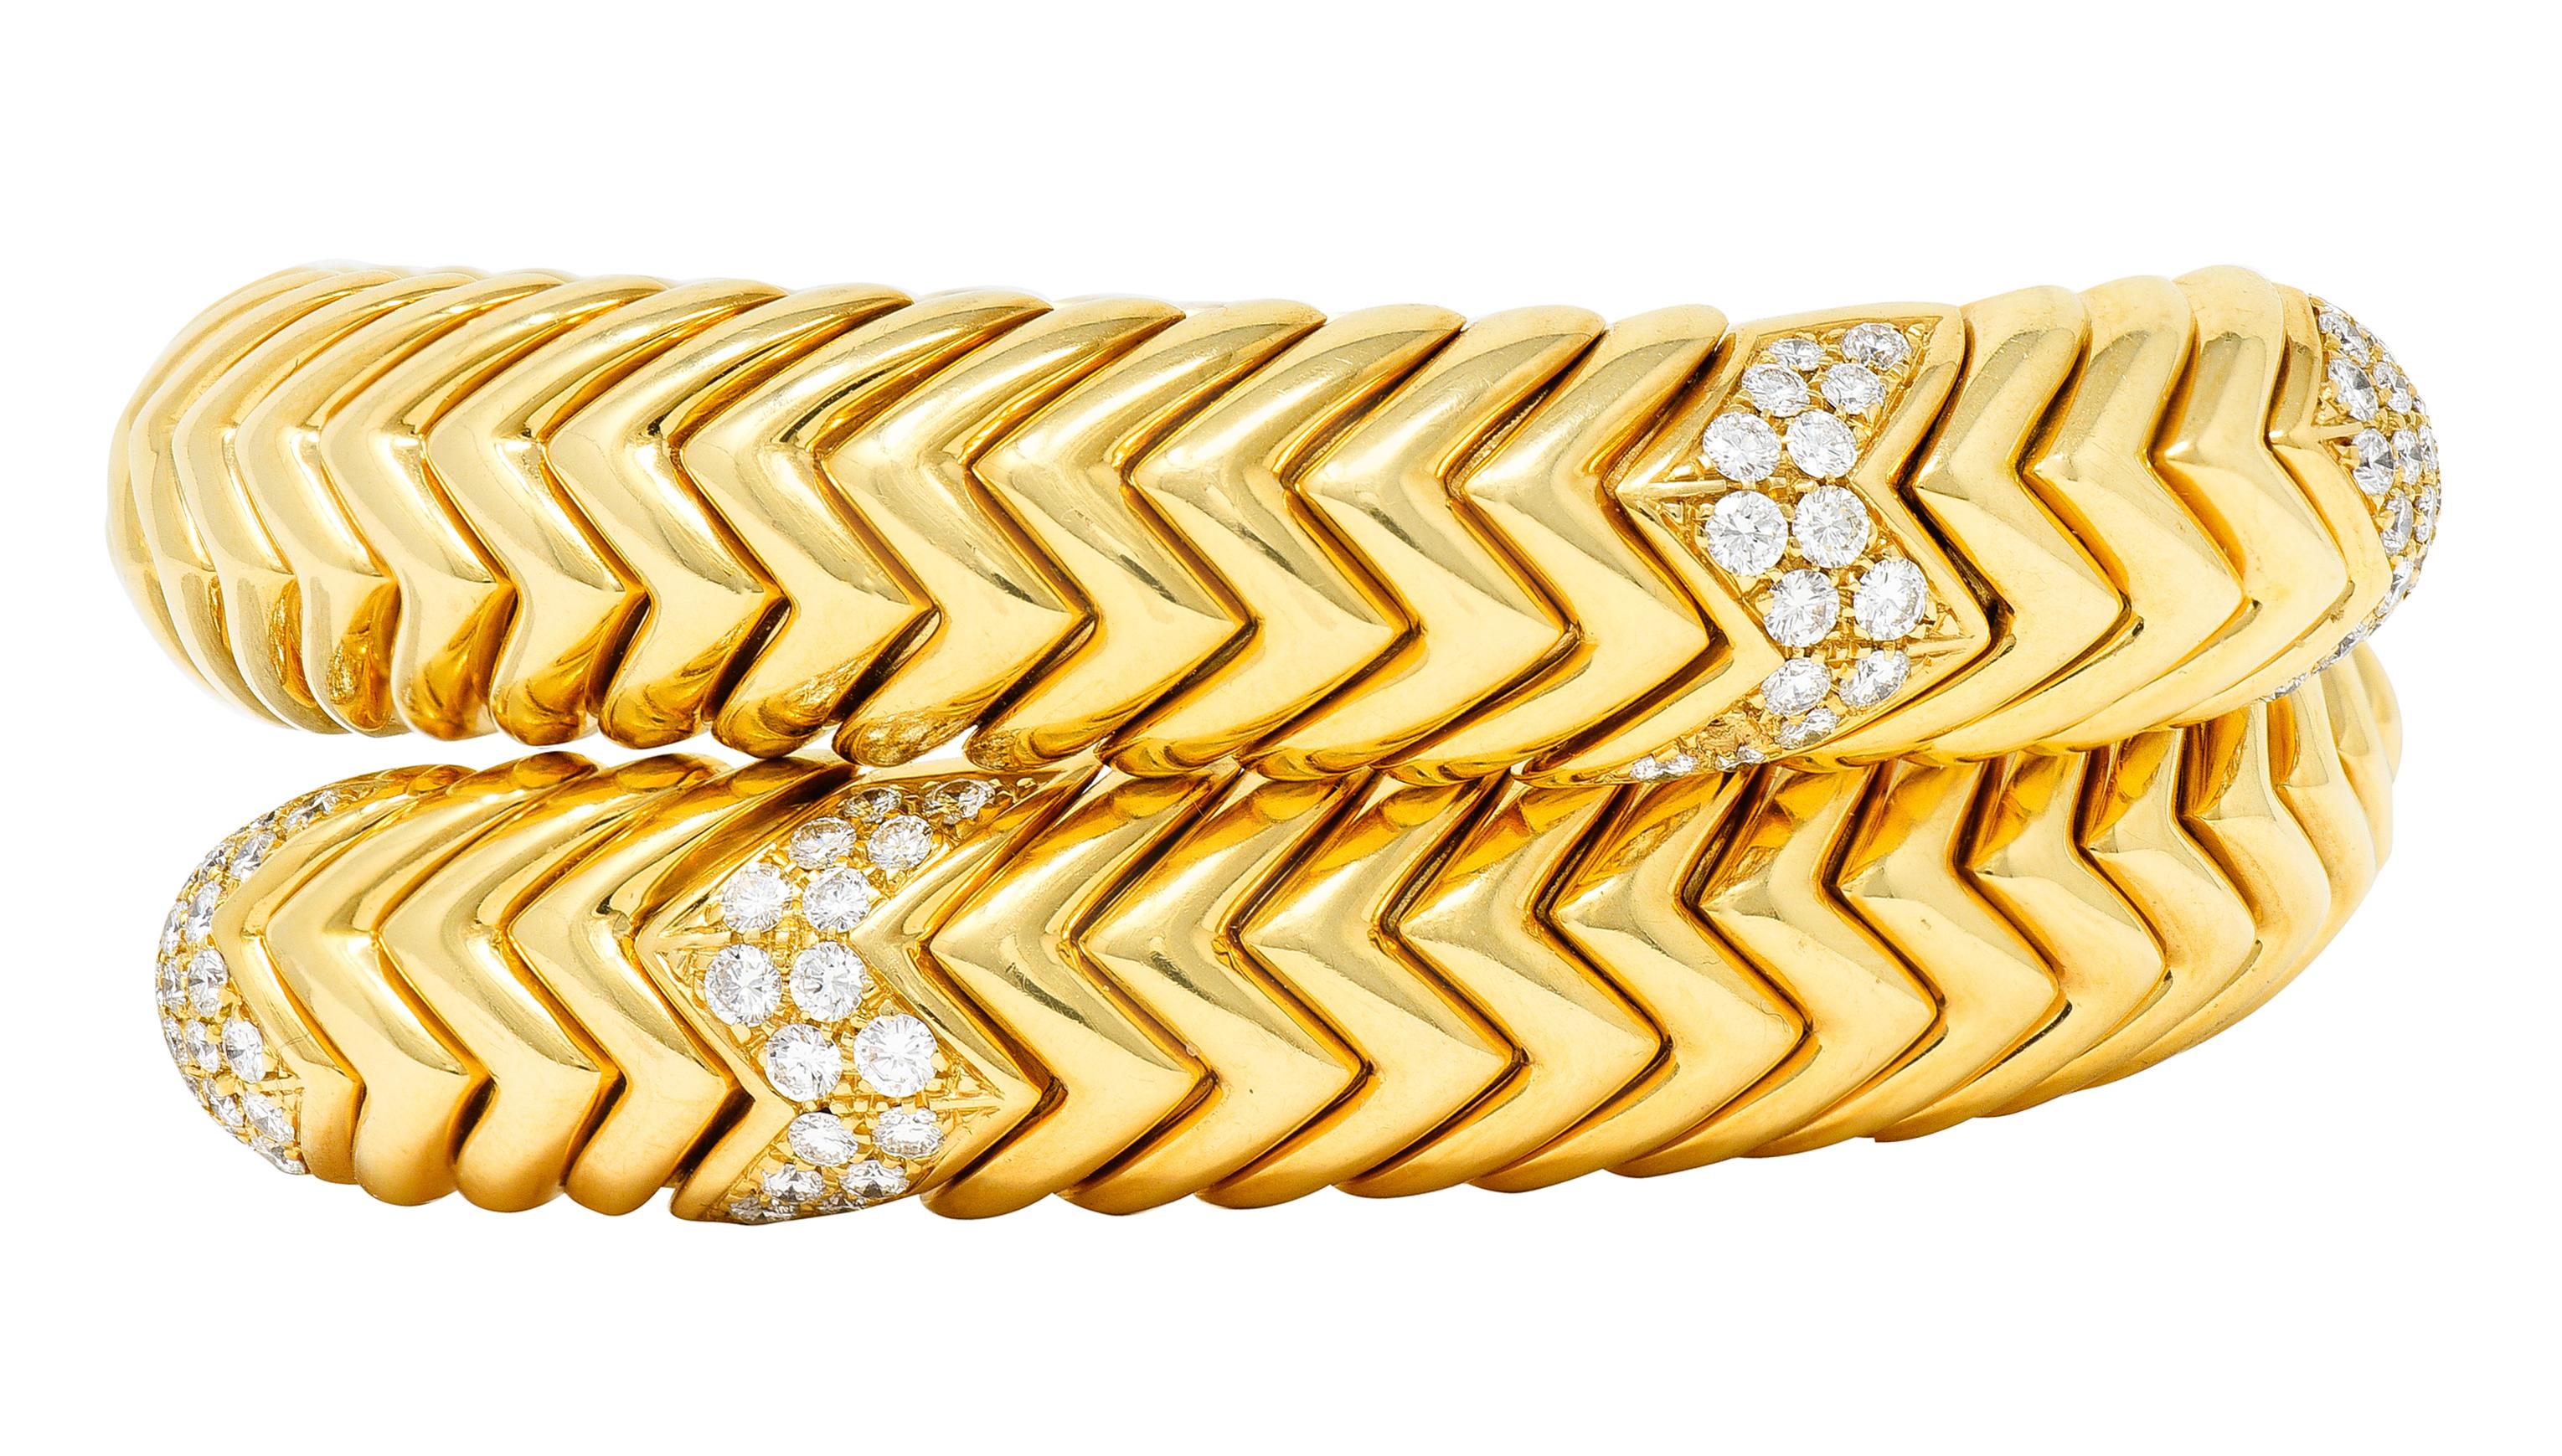 Flexible cuff bracelet wrap is comprised of polished gold chevron links

Deeply ridged and pavè set with round brilliant cut diamonds

Weighing in total approximately 1.90 carats - F/G color with VS clarity

Italian assay marks for 18 karat gold and